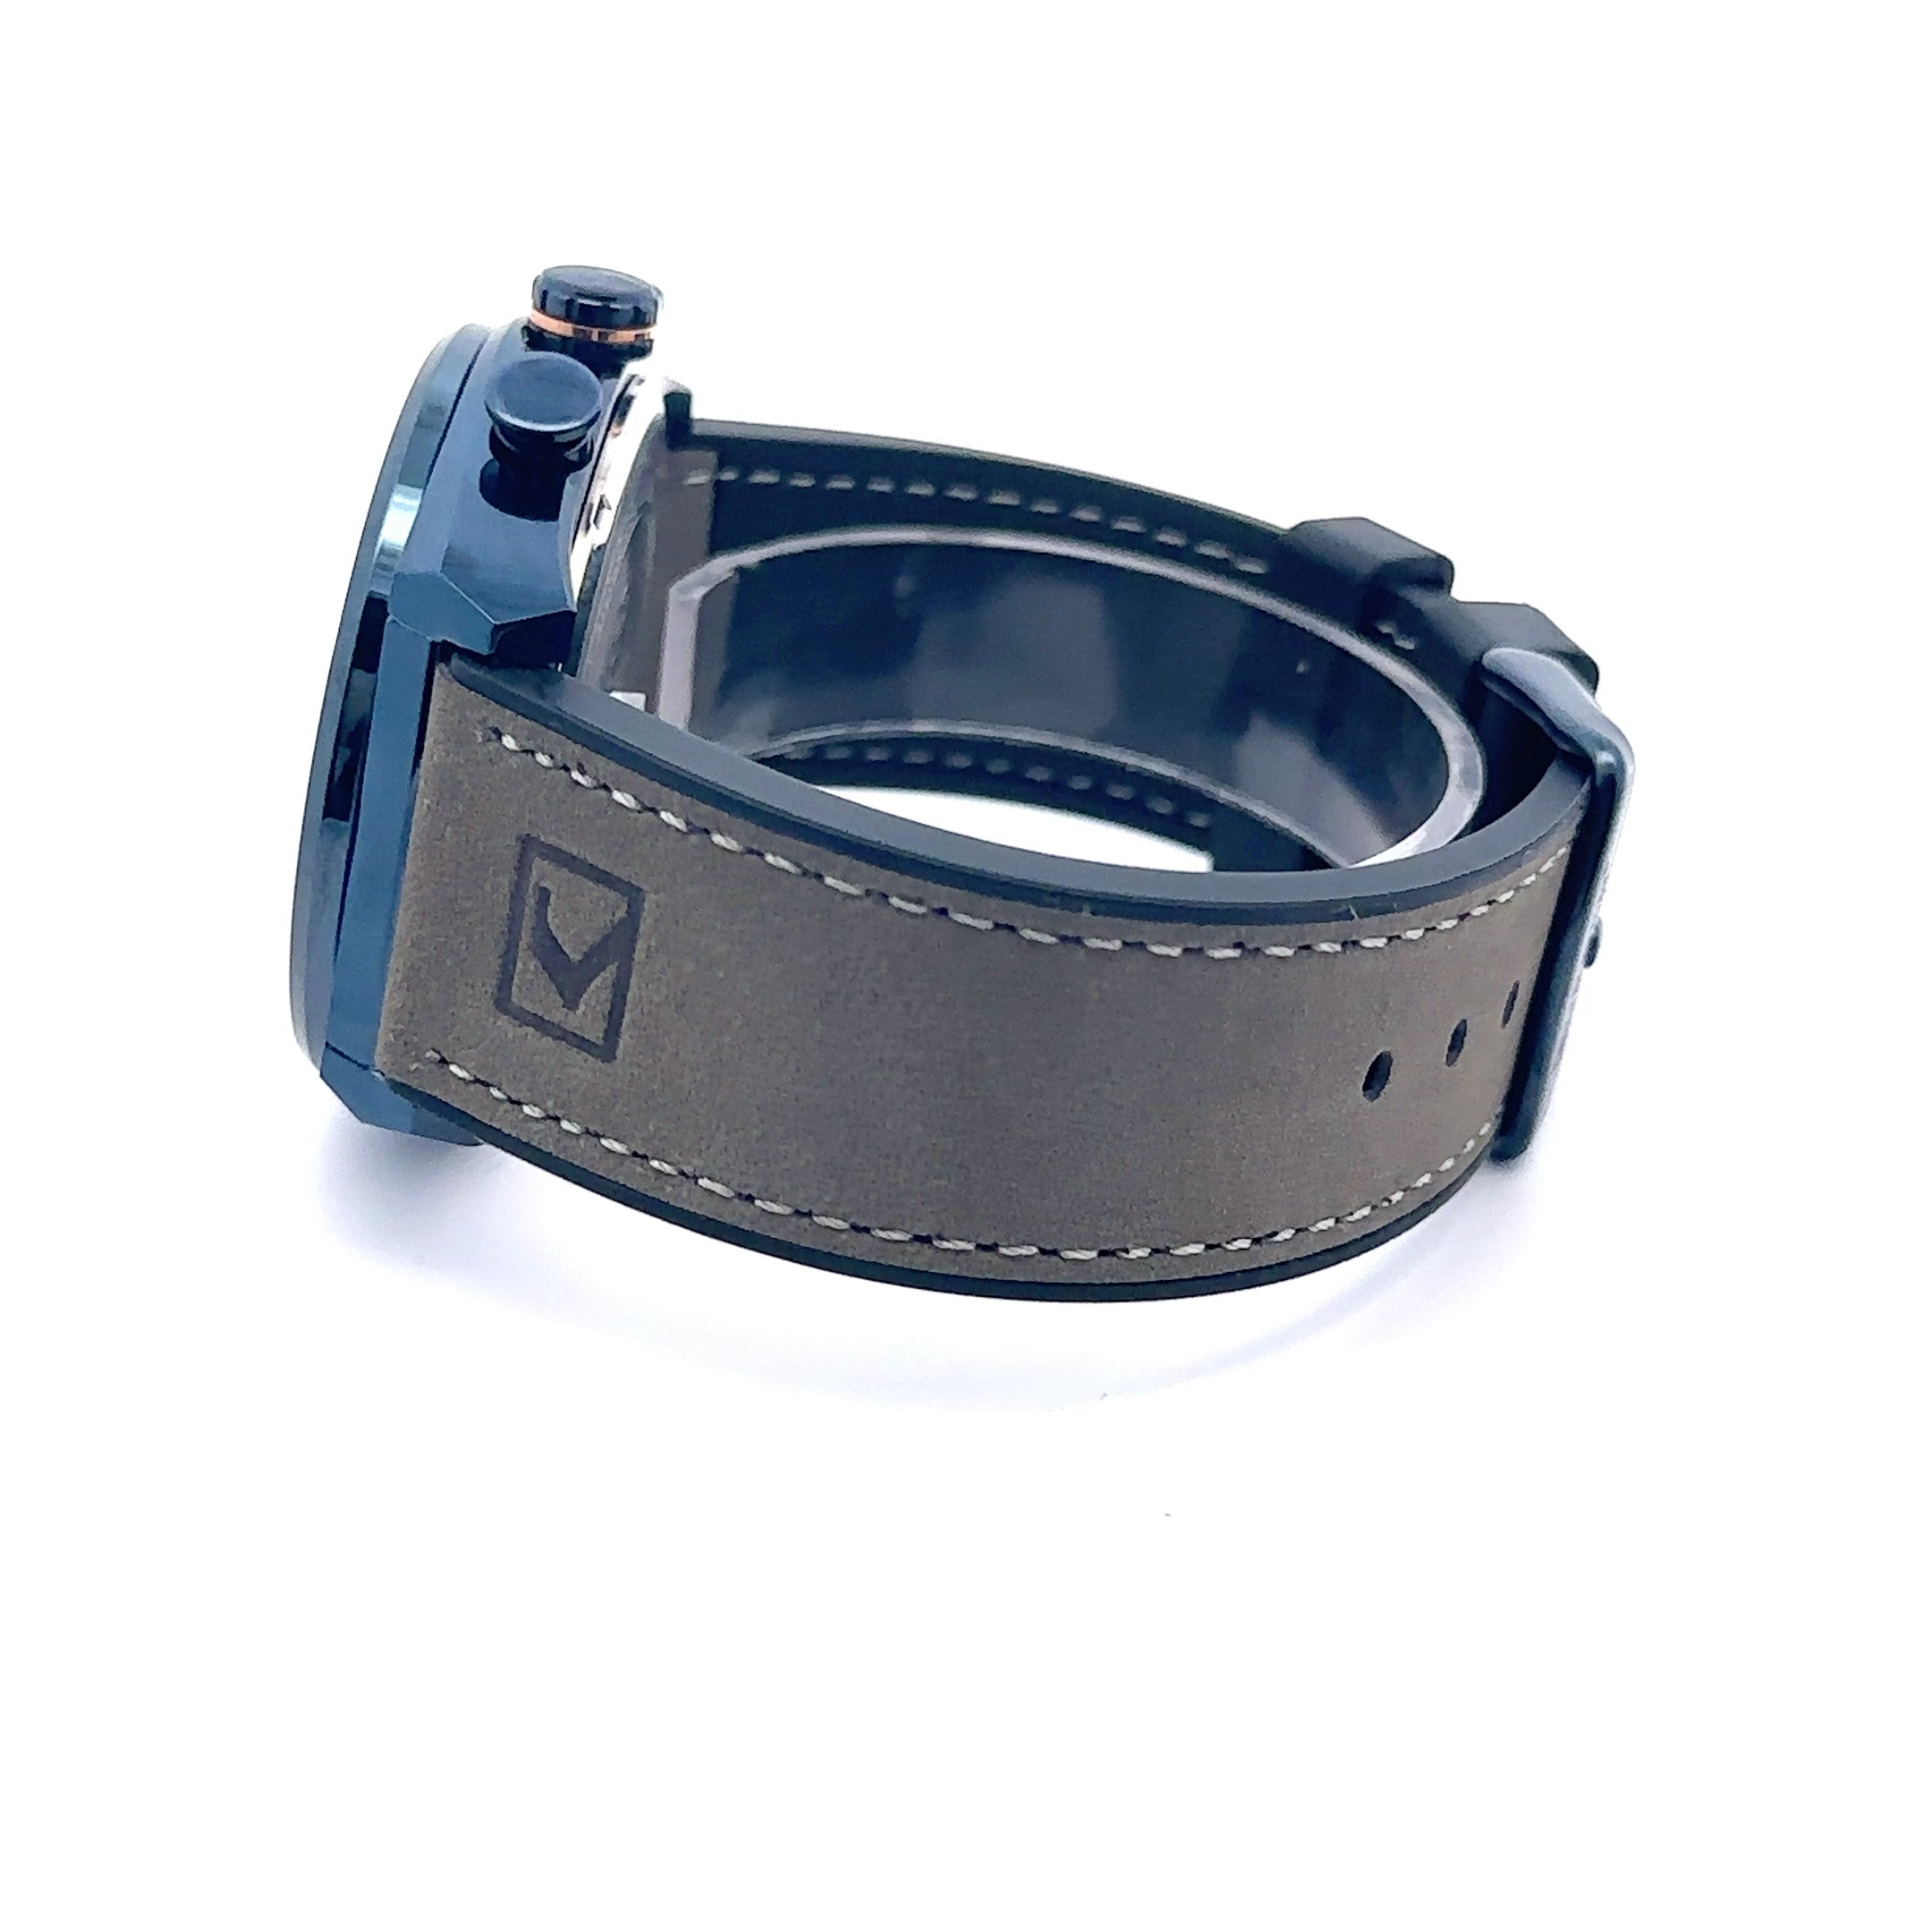 NOVATUS CURREN GREY LEATHER ICED OUT WATCH I 5416329